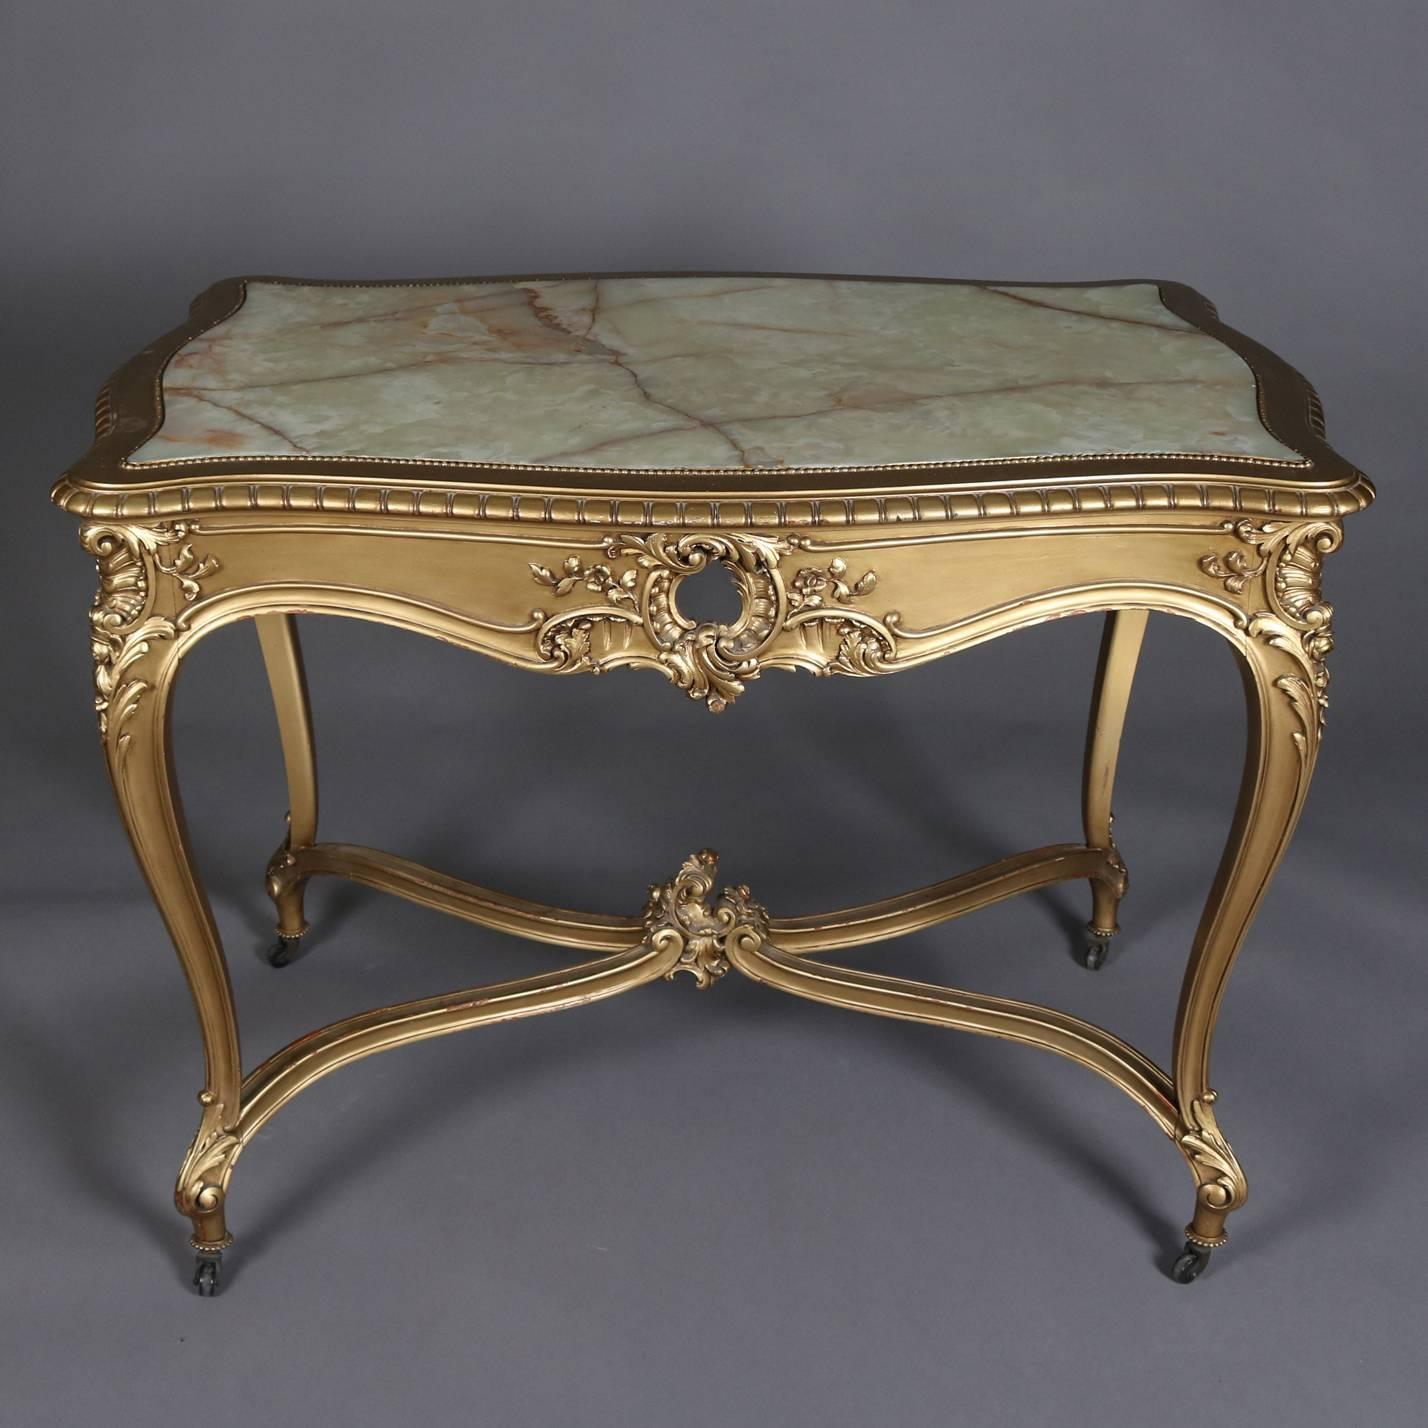 Rococo Antique French Louis XIV Giltwood and Onyx Centre Table, 19th Century